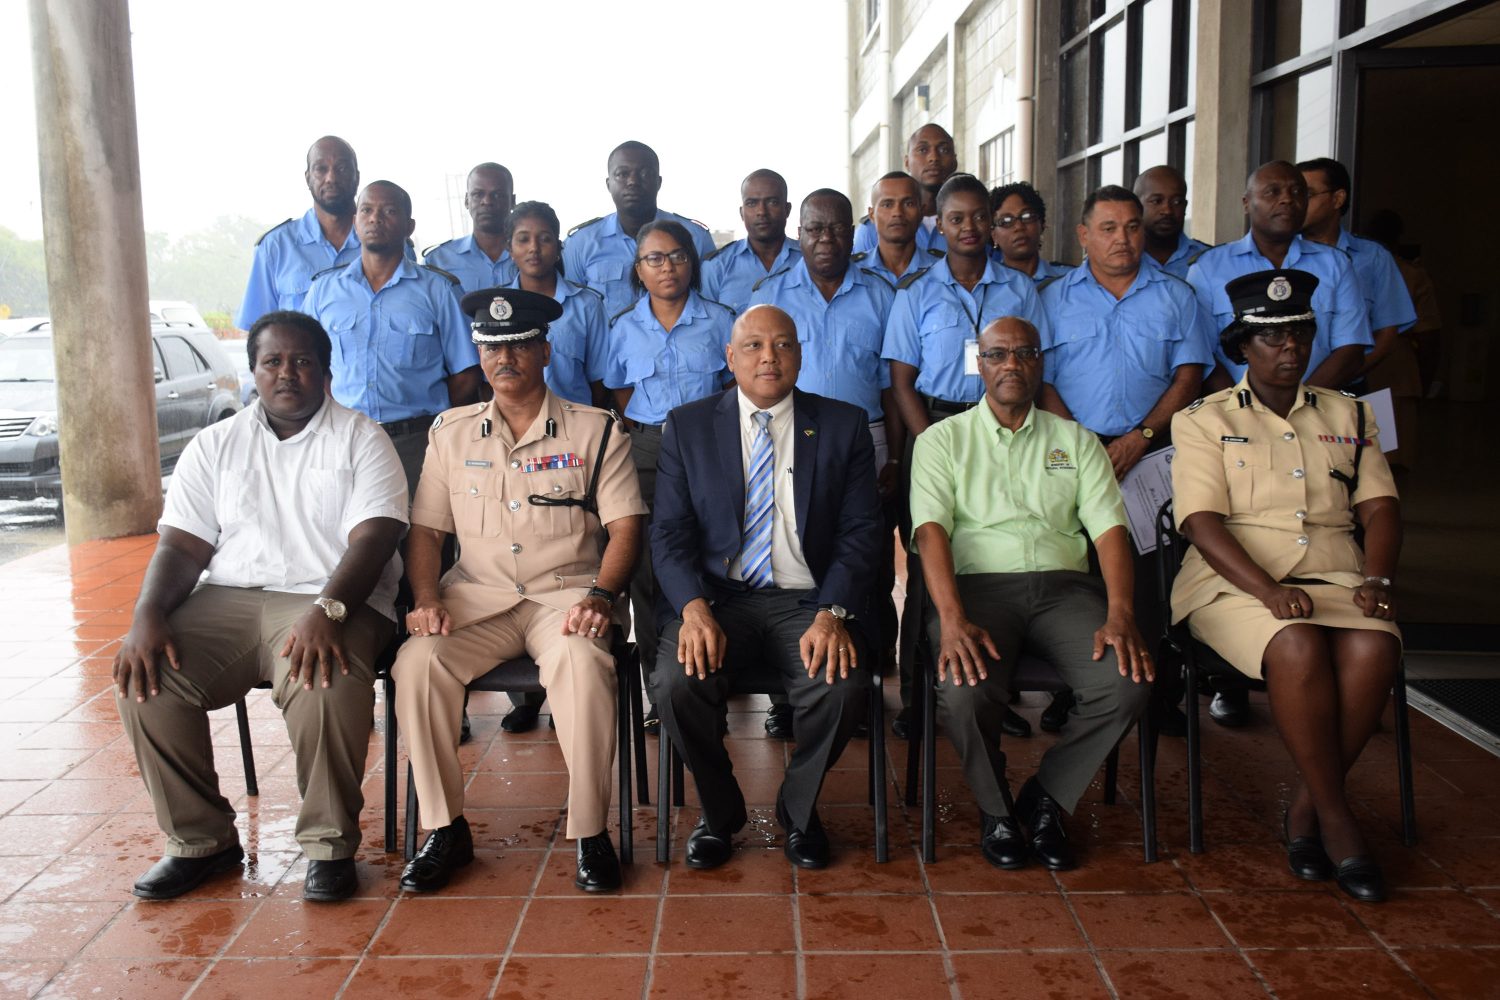 The wardens are standing in this DPI photo. Minister of Natural Resources Raphael Trotman is seated at centre. Police Commisisioner (ag) David Ramnarine is seated second from left.